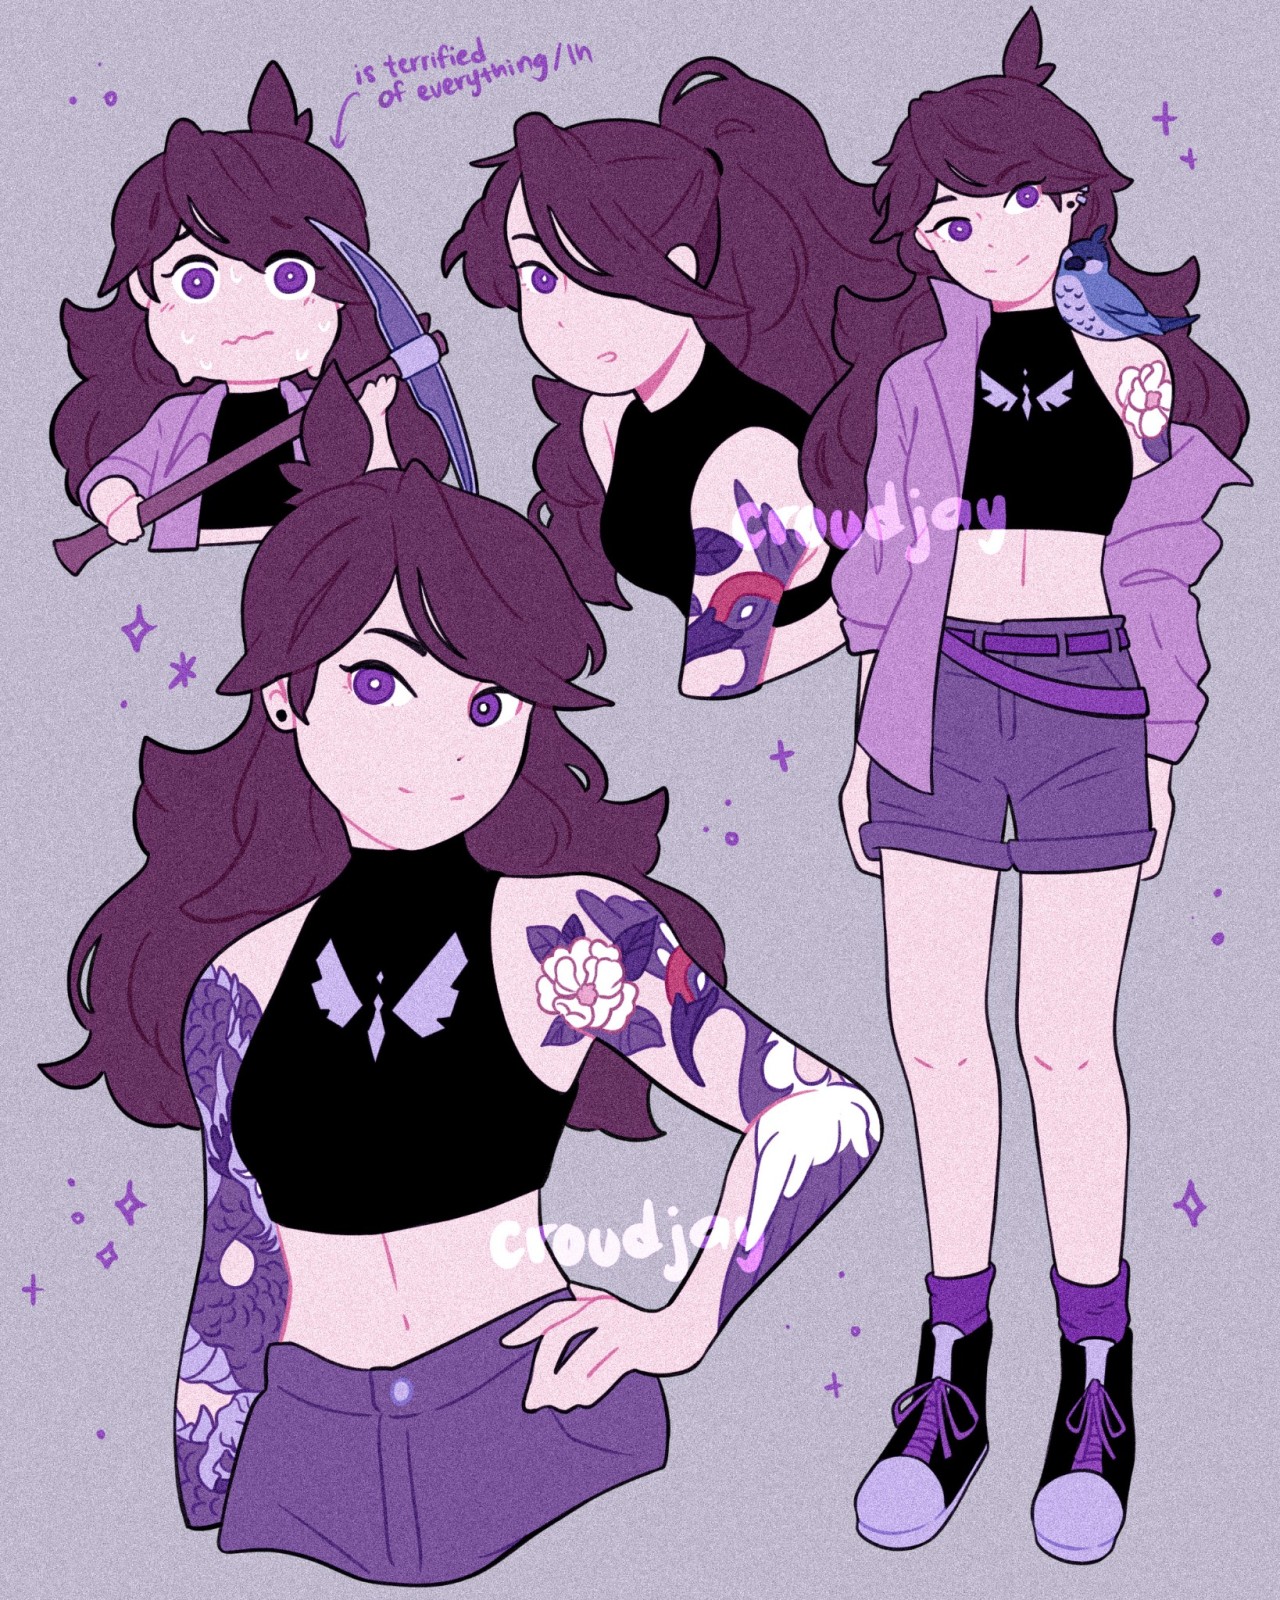 A collage of multiple drawings of Jaiden. She has her purple-ish hair half-up, half-down. She has purple eyes, and is wearing a black crop top with a purple jacket over it. She wears darker purple shorts and purple and black hightops with dark purple laces. On the crop top is a white ensignia that looks like bird wings taking off. In some of the drawings, she has her jacket off showing off two full sleeves of tattoos, but it is difficult to make out what they are. In one drawing is a bluebird that sits on her shoulder.